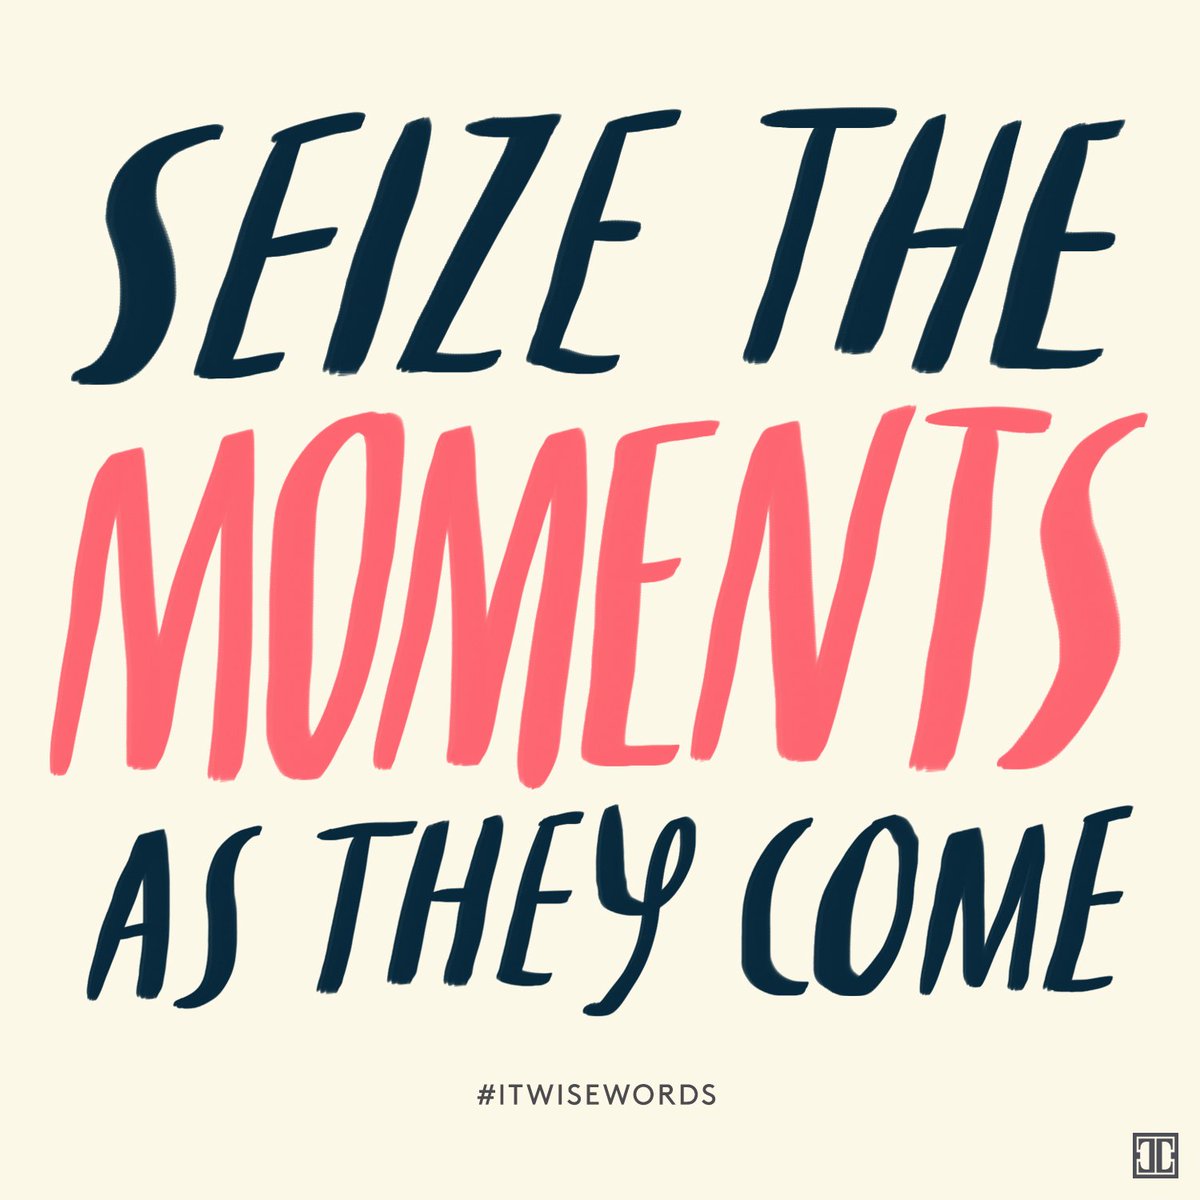 See more #ITwisewords: https://t.co/6rwiHW6w8j #wisewords #quote #inspiration https://t.co/tnp2RHUyff